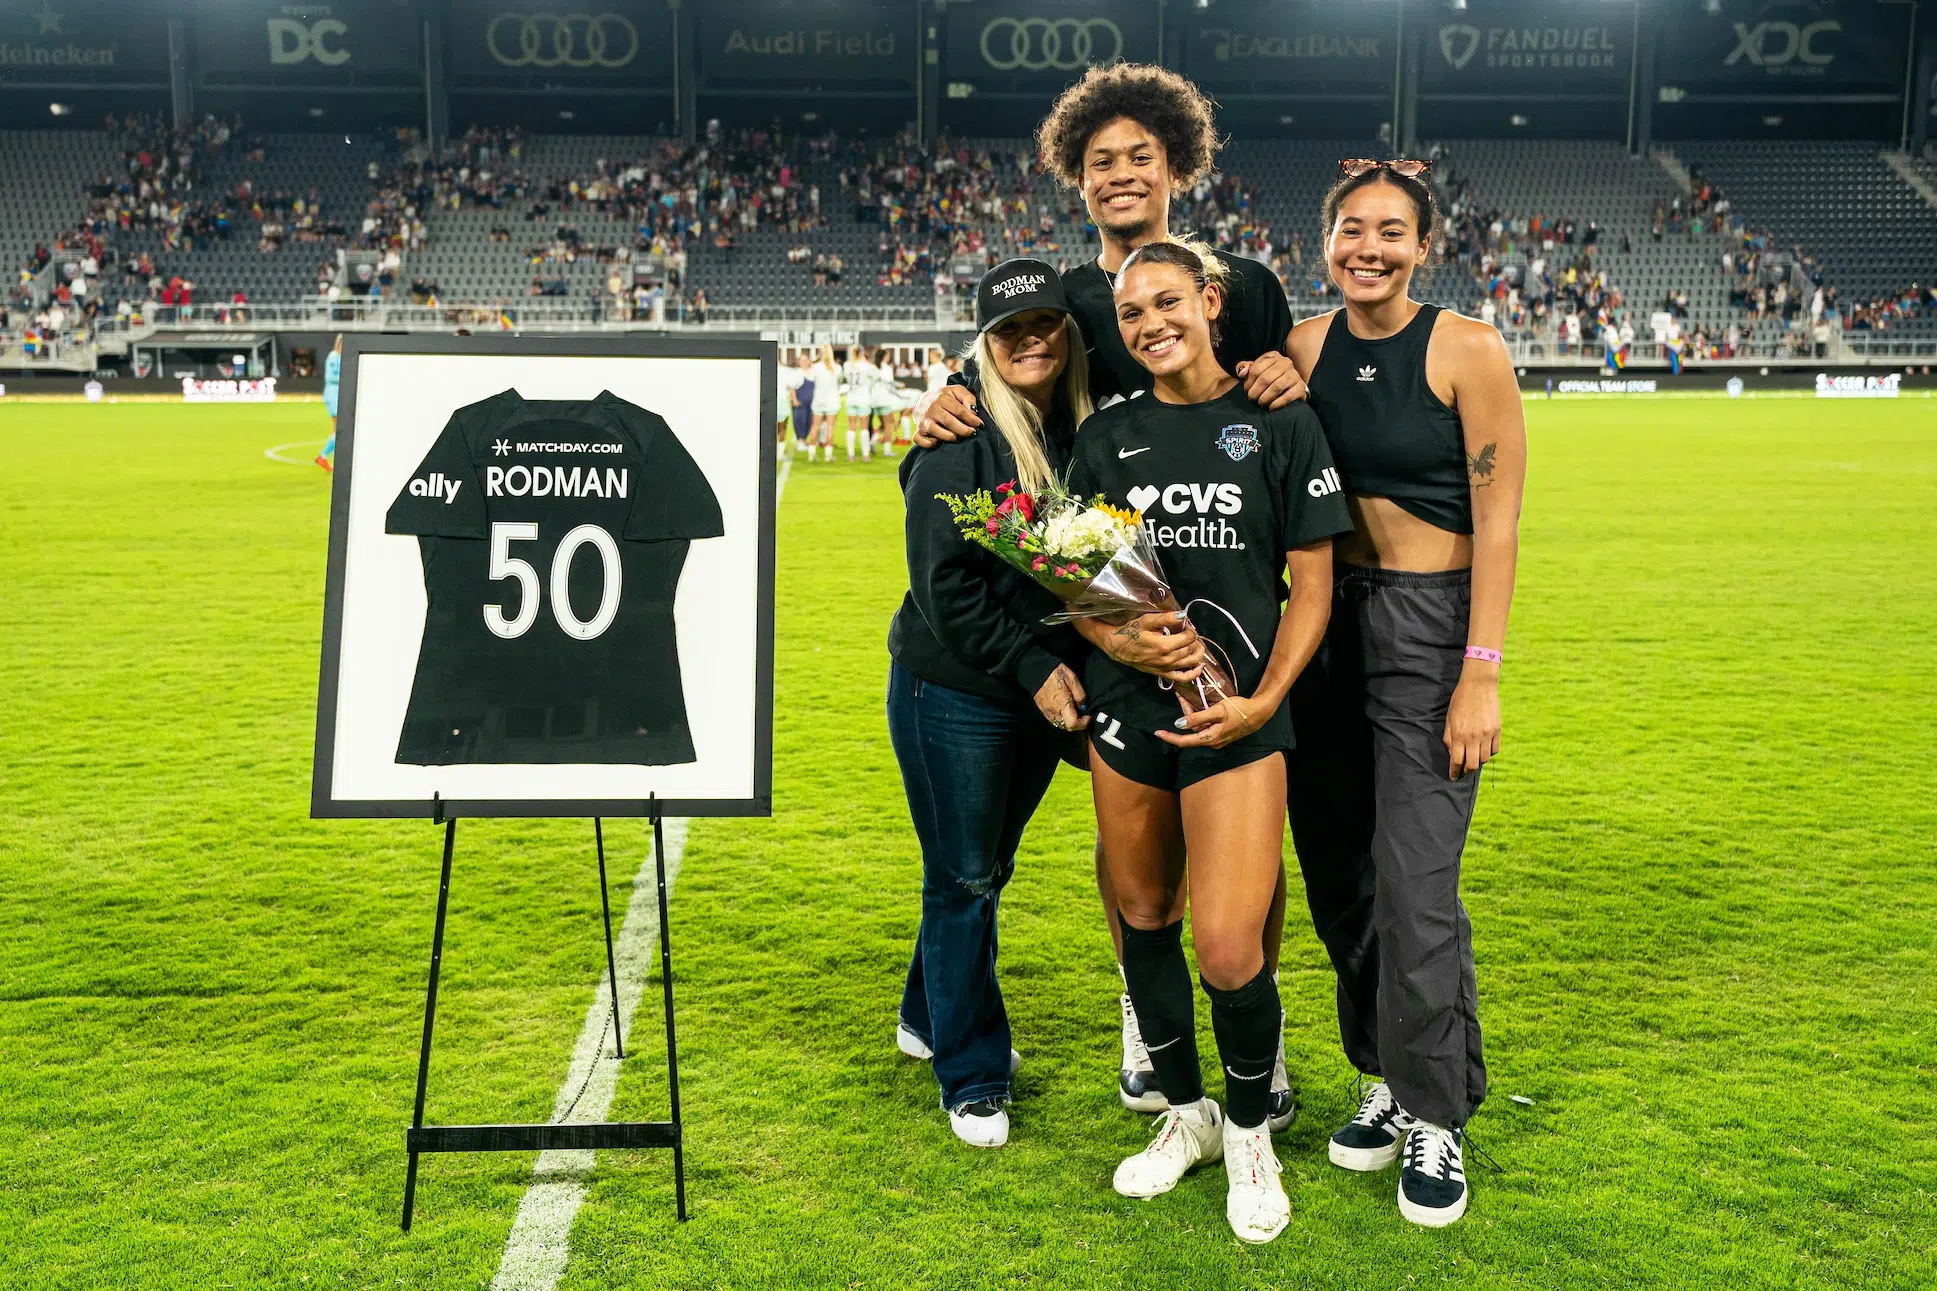 Trinity Rodman in a black uniform holds a bouquet of flowers and is surrounded by her mother, brother and friend as they take a photo next to a framed black jersey with her name and the 50 on it to celebrate her 50 caps.